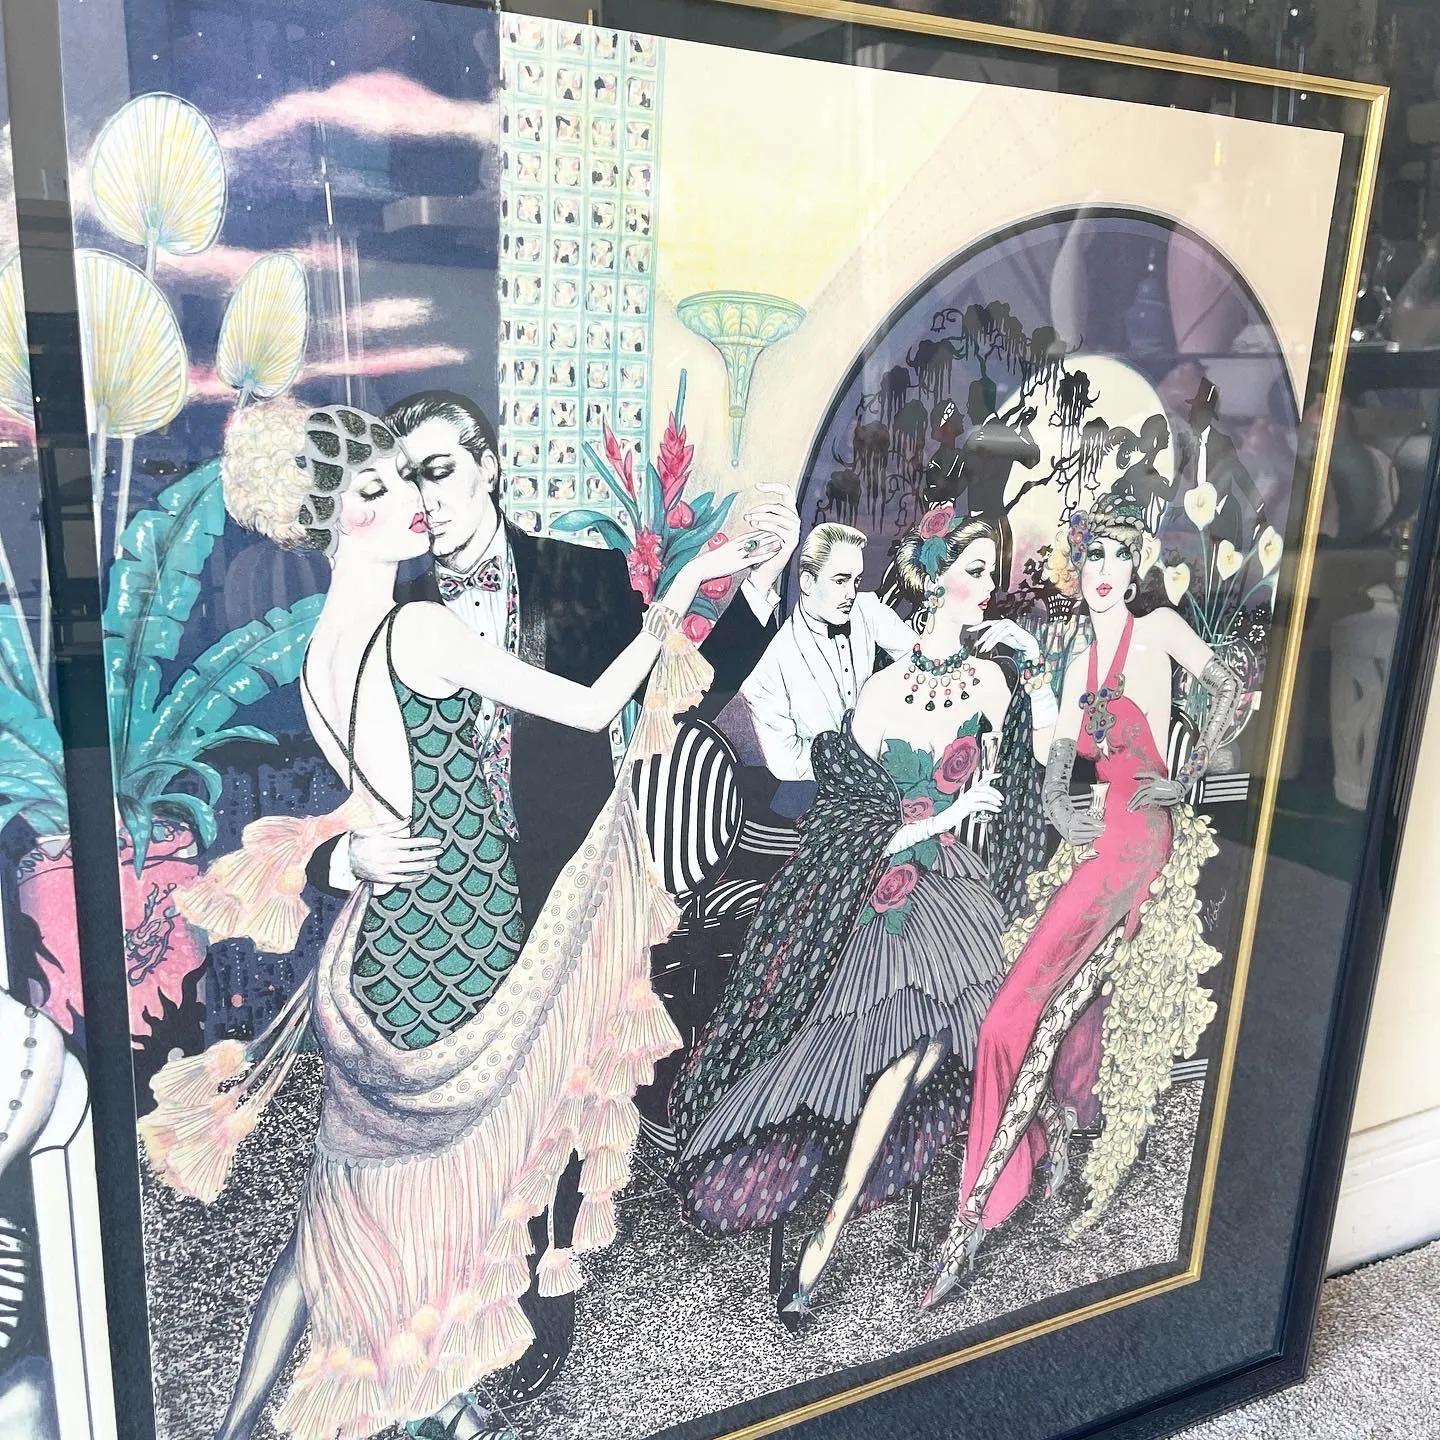 Incredible signed and framed pair of lithographs by Mary Vickers. One titled “who needs Tomorrow?” And the other “We’ve got tonight” . Displays an epic Art Deco party.

Additional information: 
Material: Lithograph
Color: Black
Style: Art